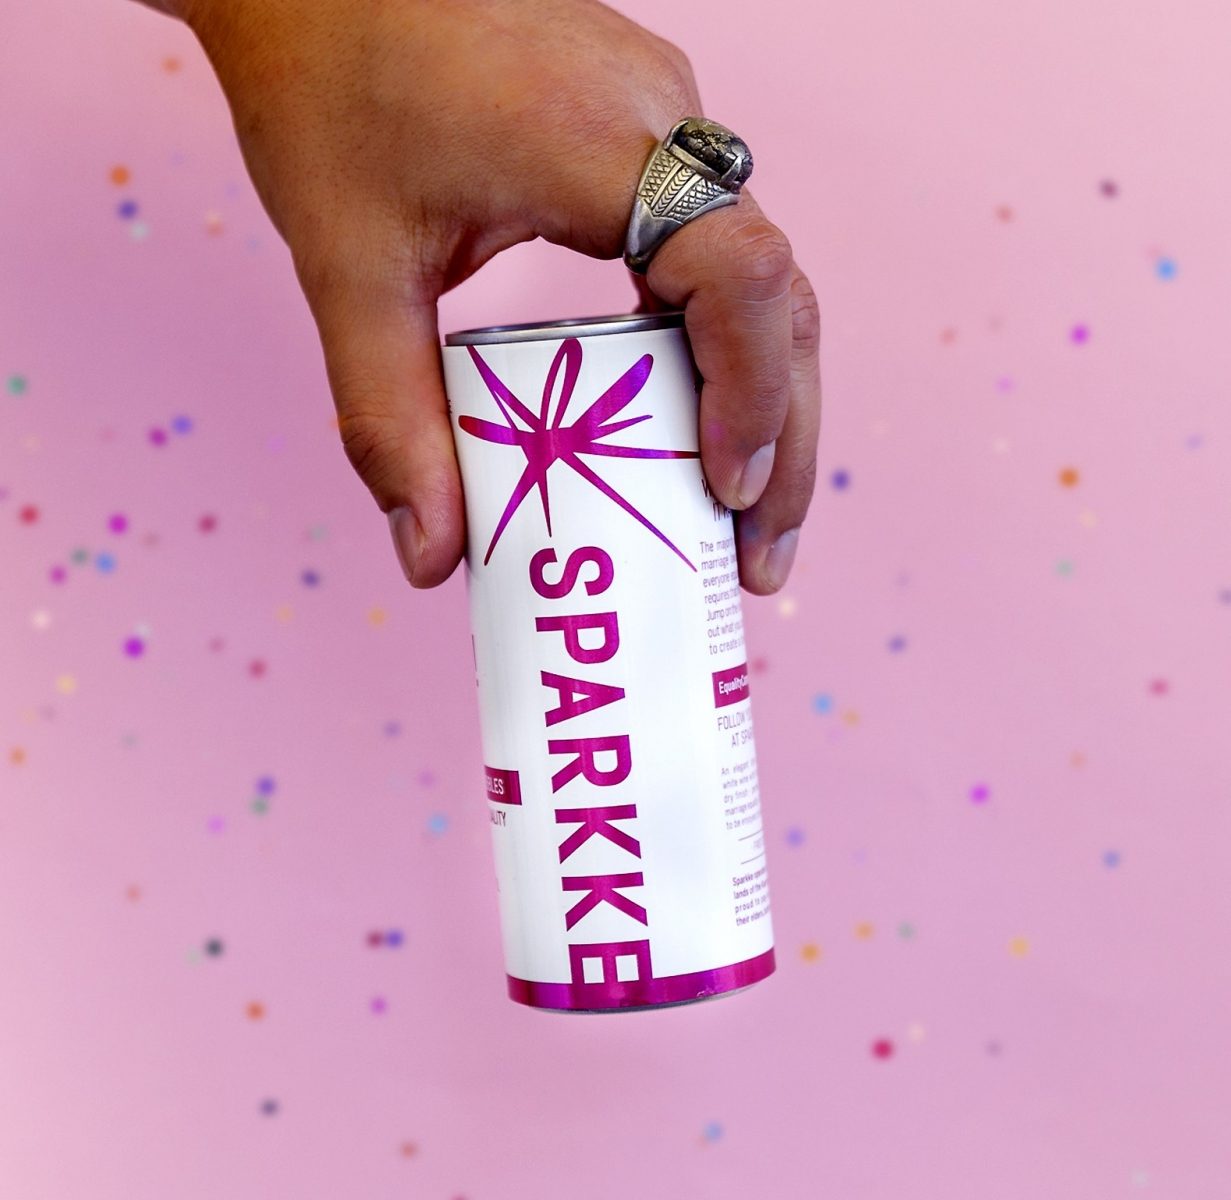 Can of Sparkke